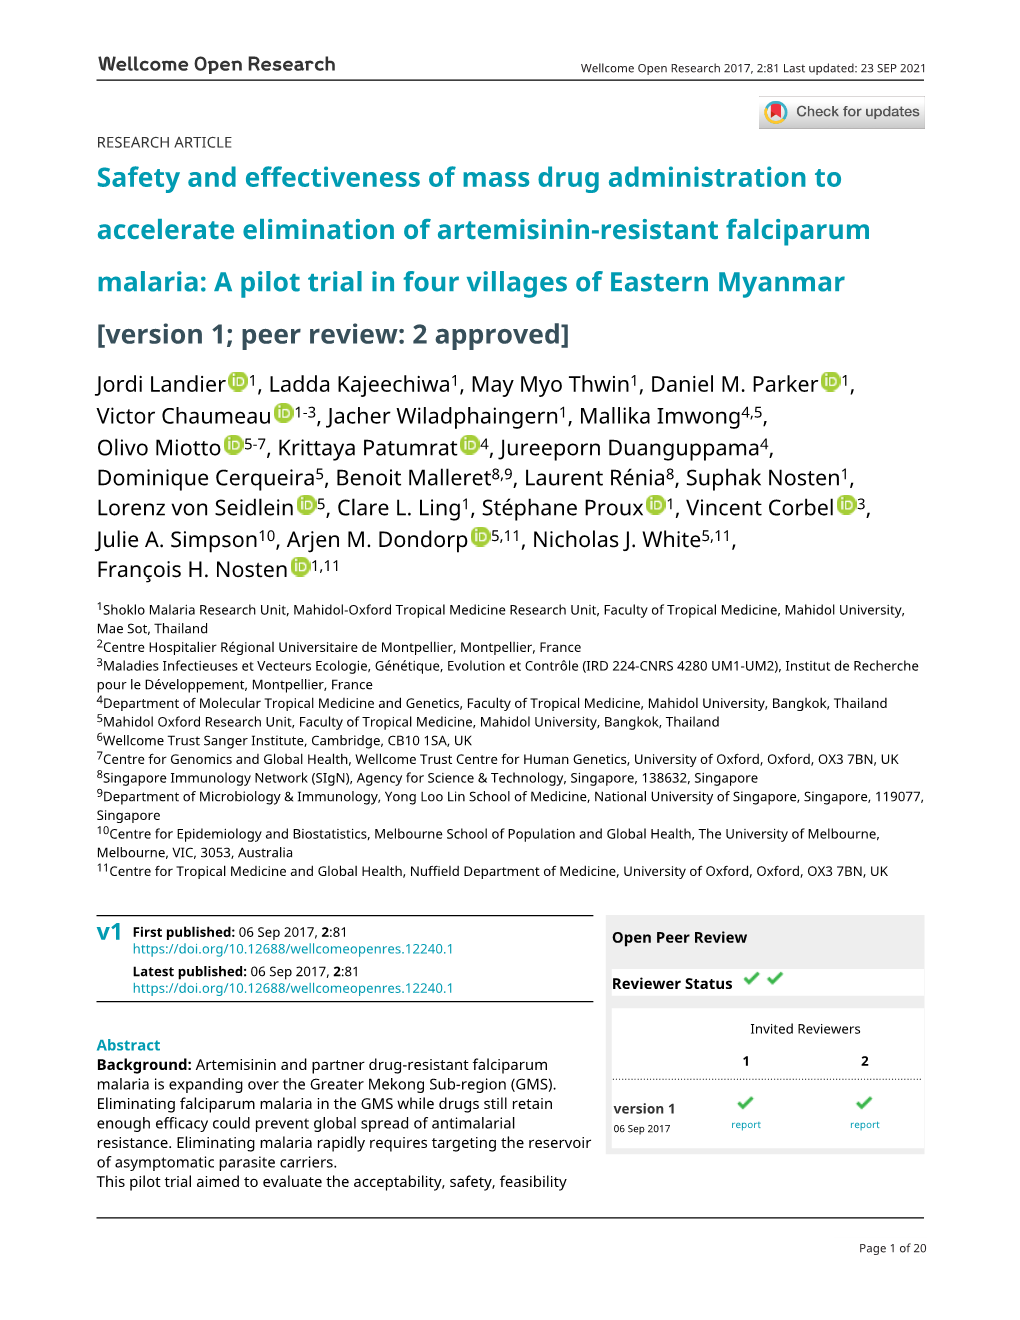 Safety and Effectiveness of Mass Drug Administration to Accelerate